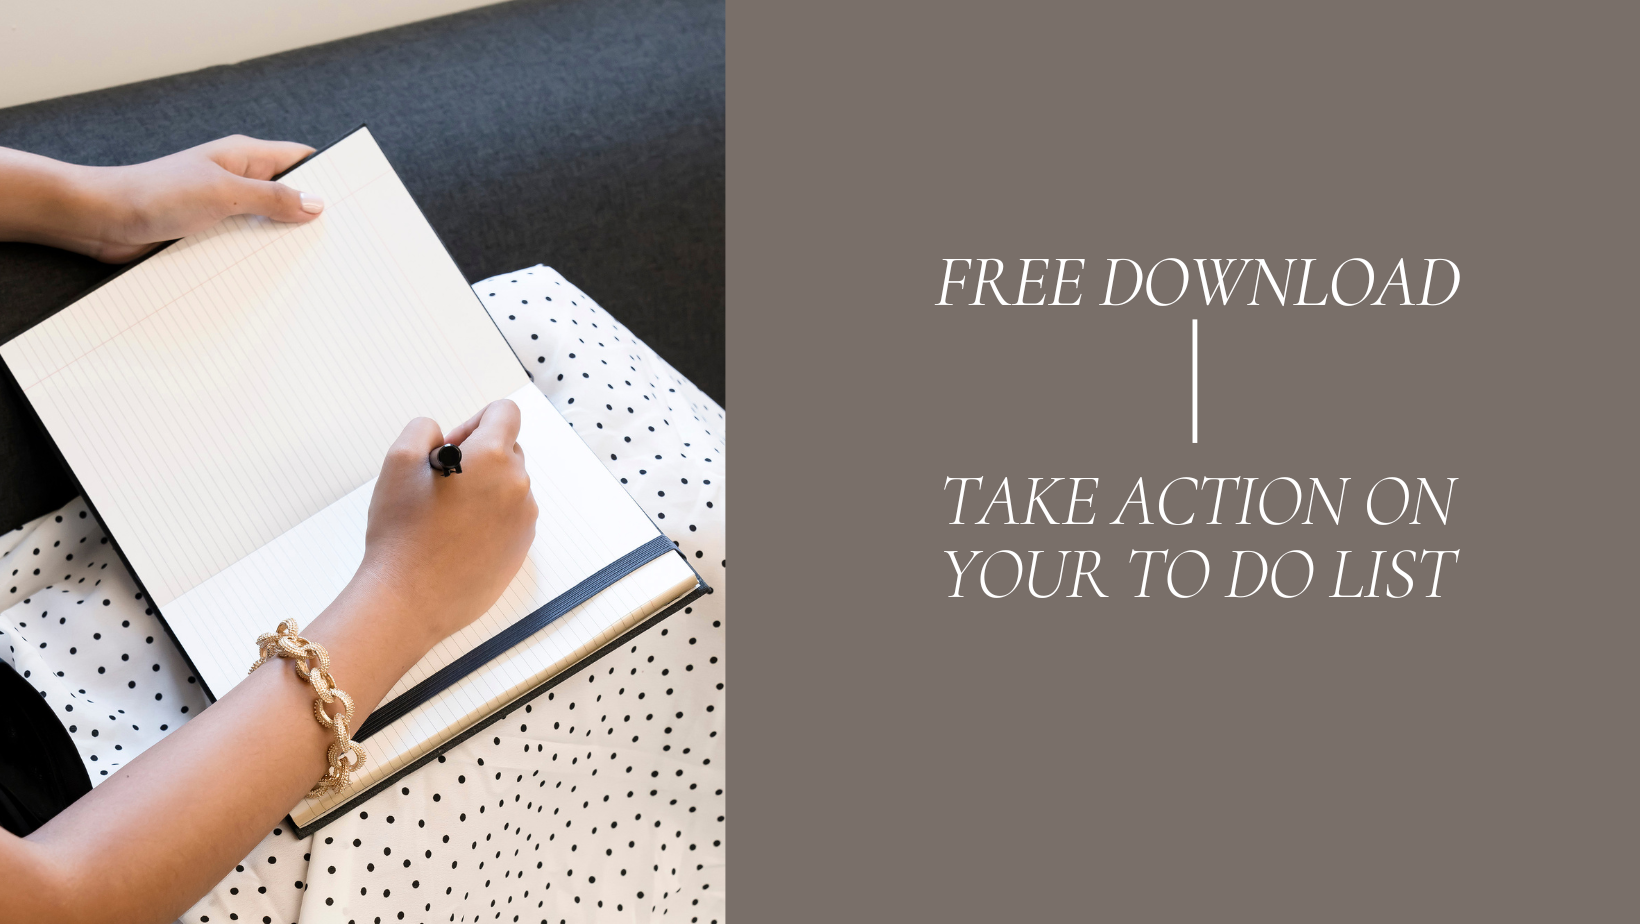 Take Action on Your To Do List